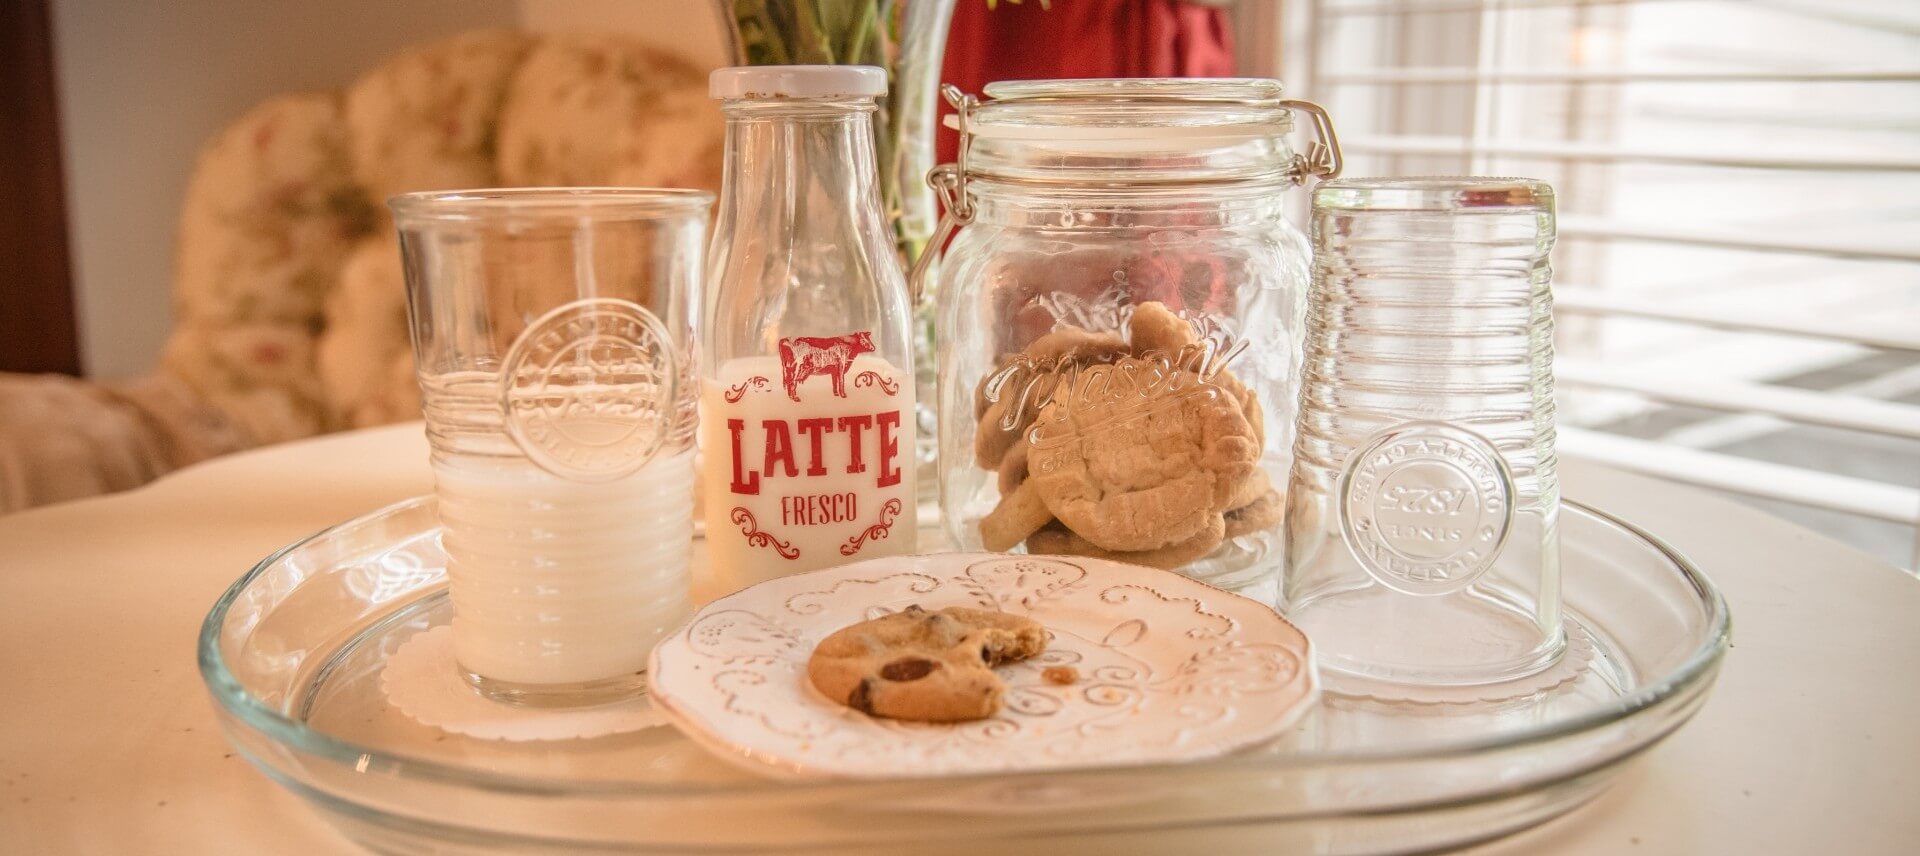 Latte milk bottle and mason style cookie jar with cookies and a cookie on a plate